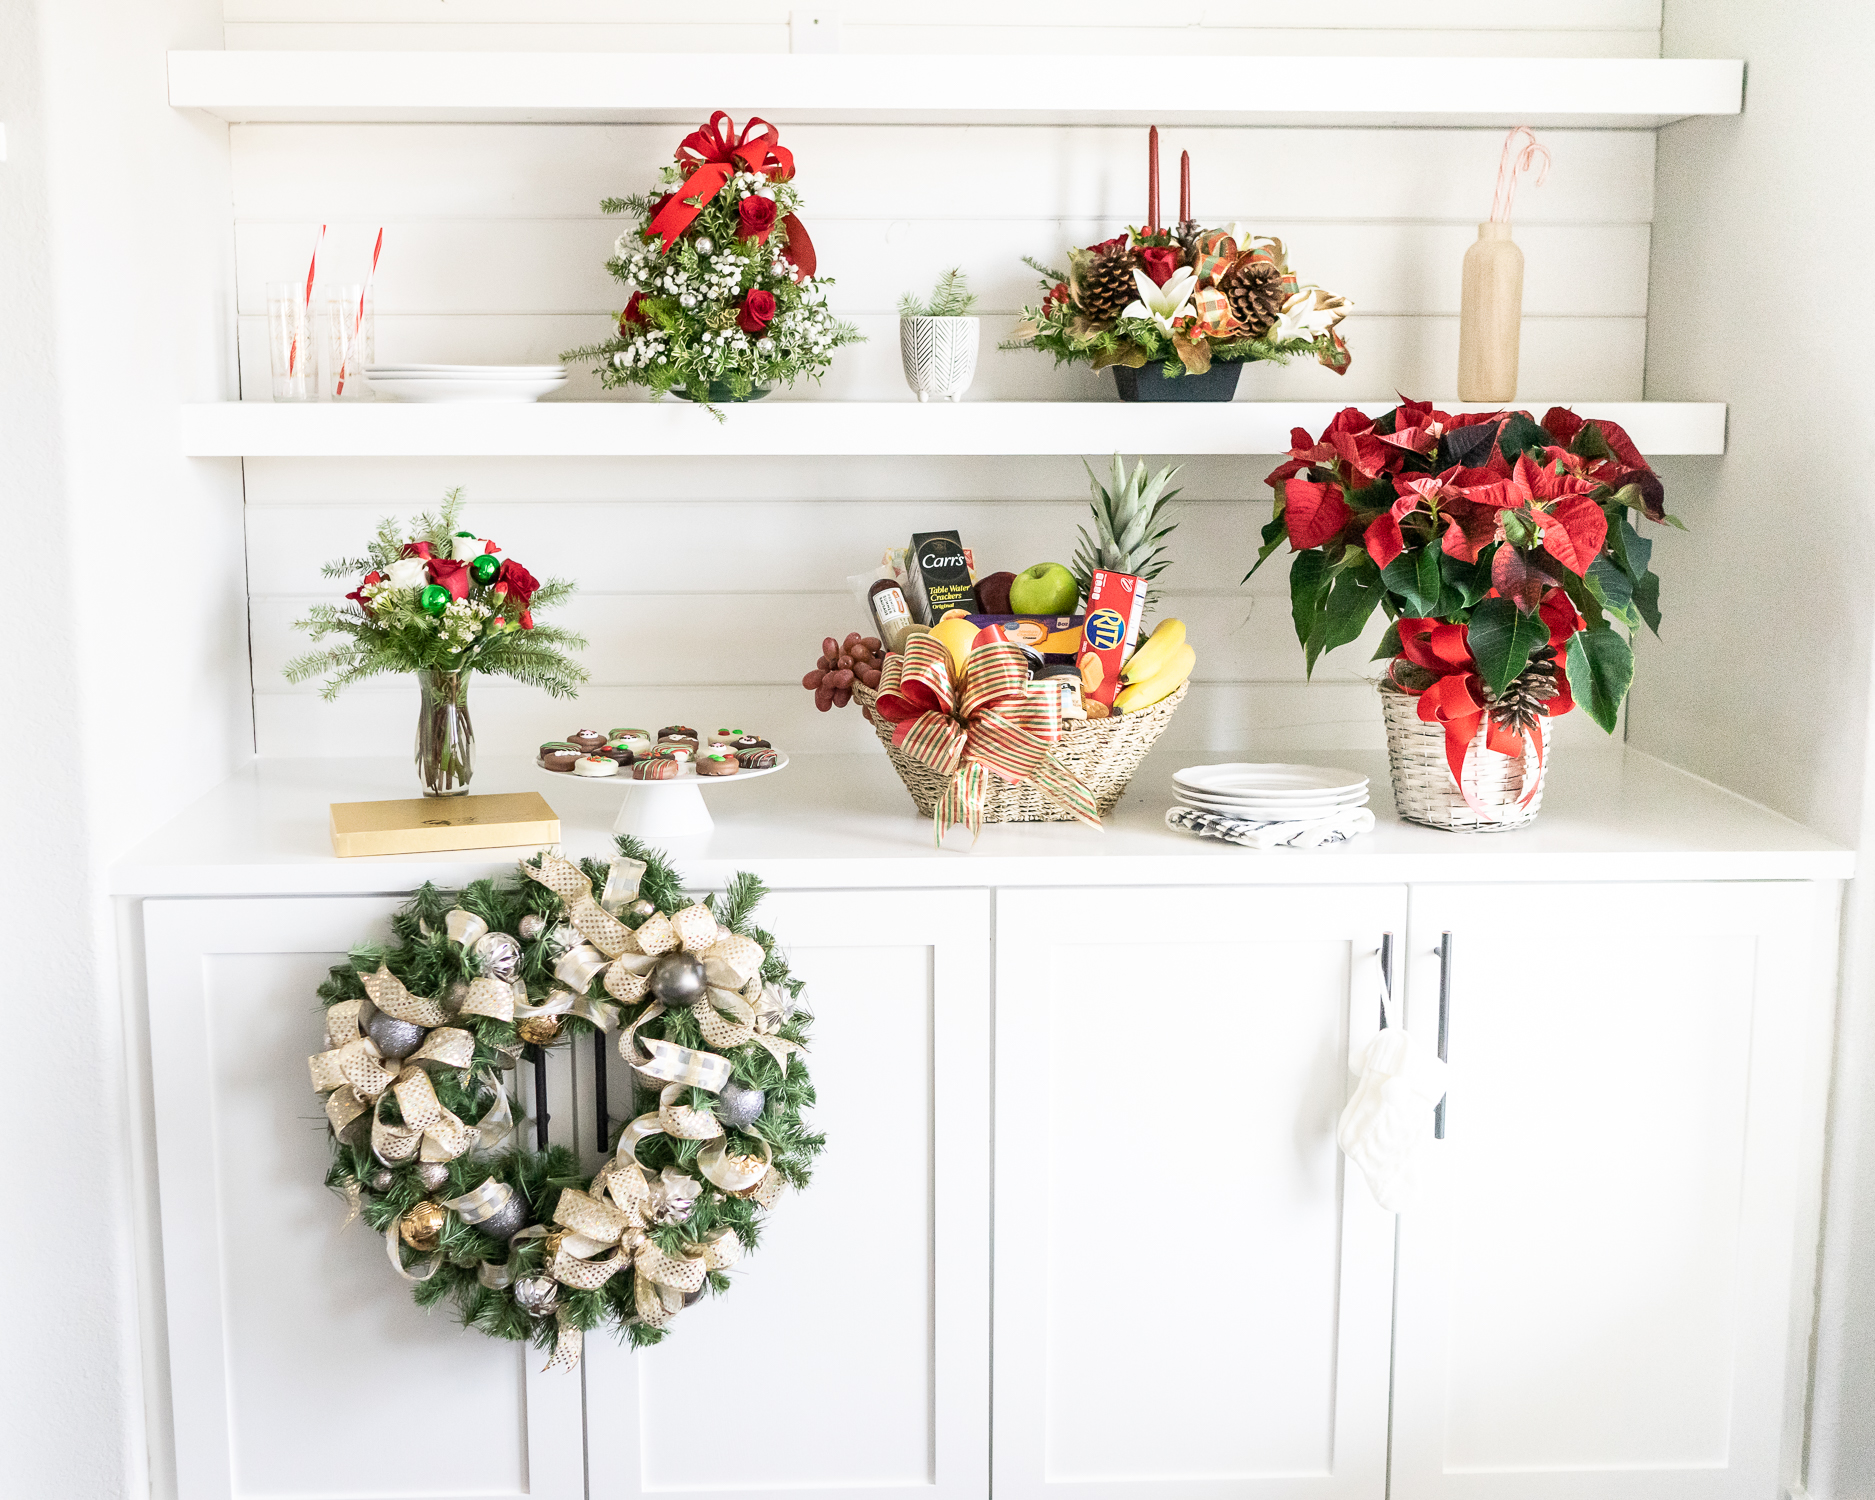 How to Decorate with a Christmas Wreath